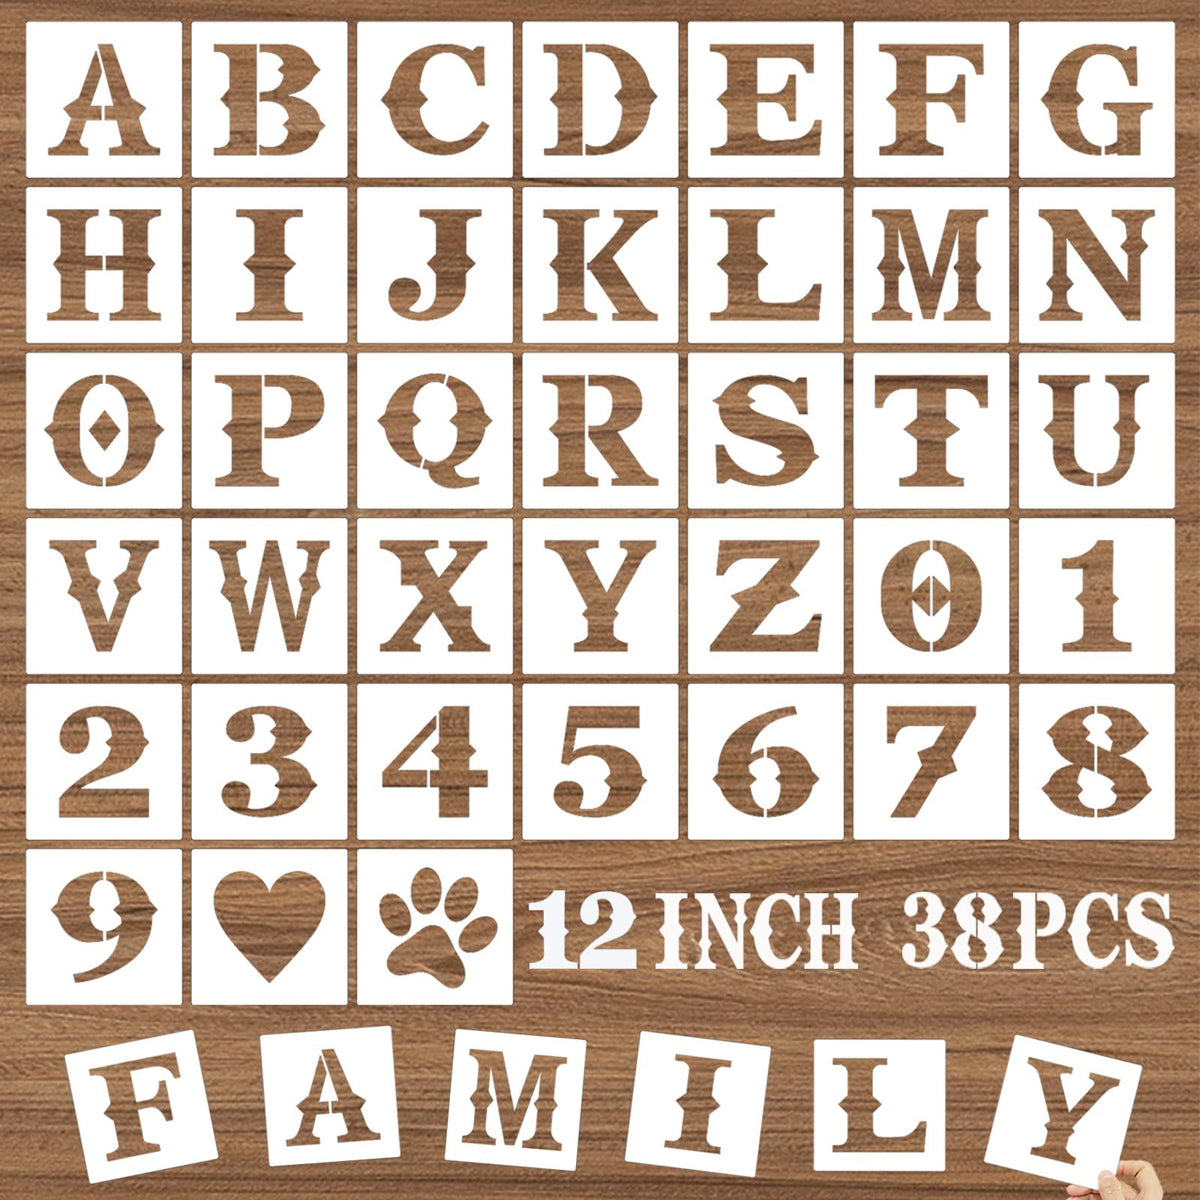 42pcs Reusable Washable Pp Letter And Number Stencils For Painting On Wood,  Scrapbooking, Fabric, Walls, Doors Etc